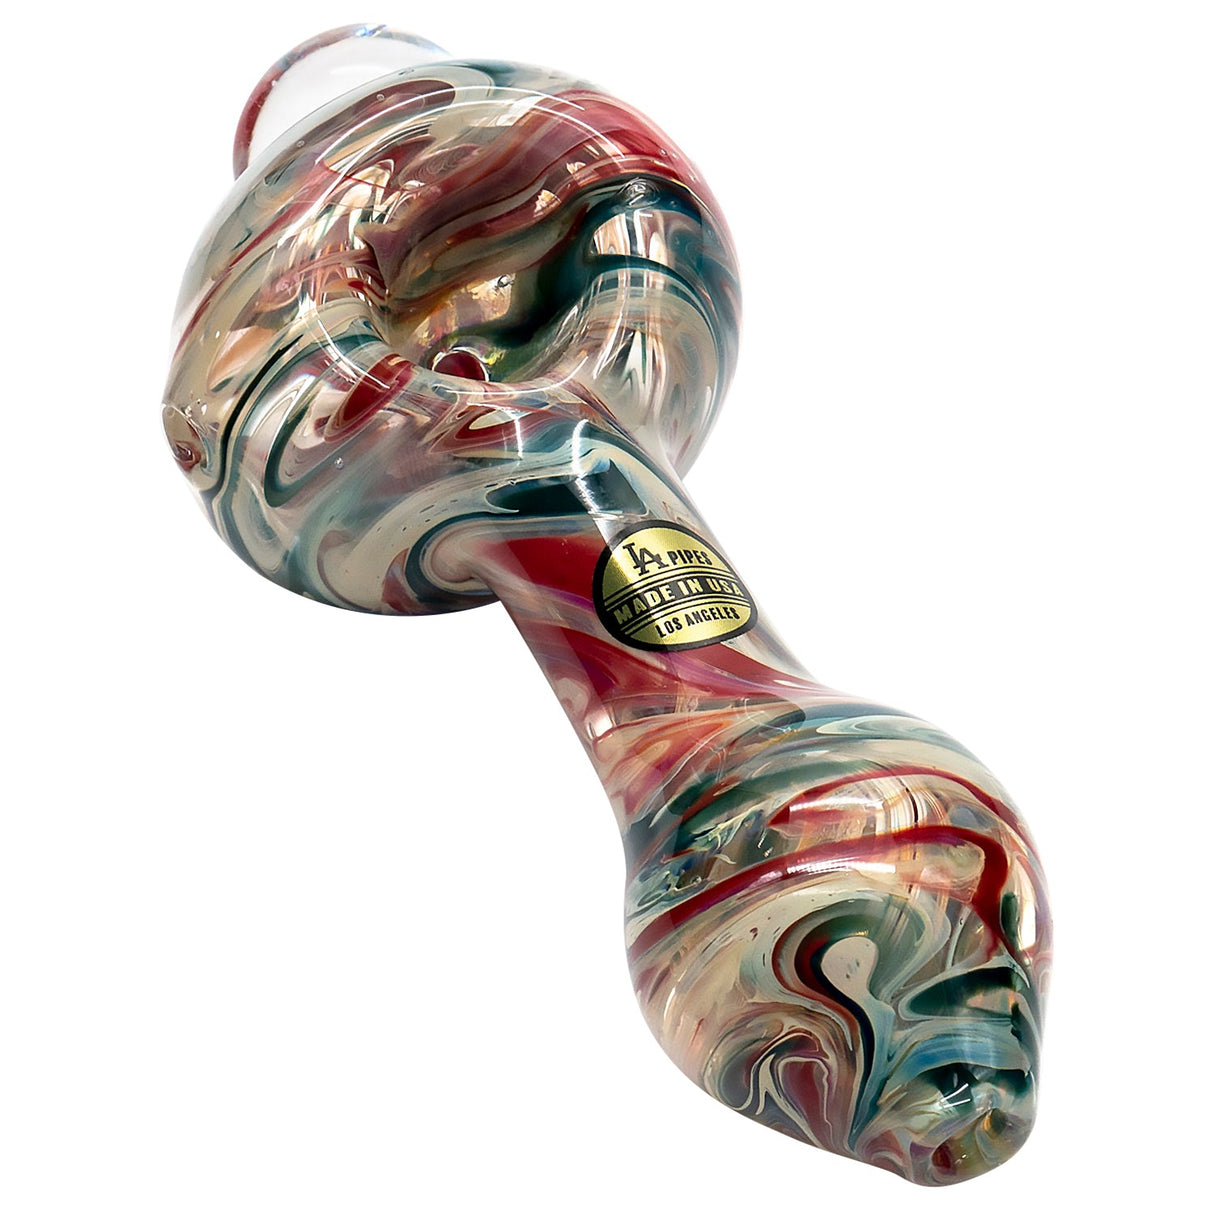 The "Primordial Ooze" Glass Spoon Pipe